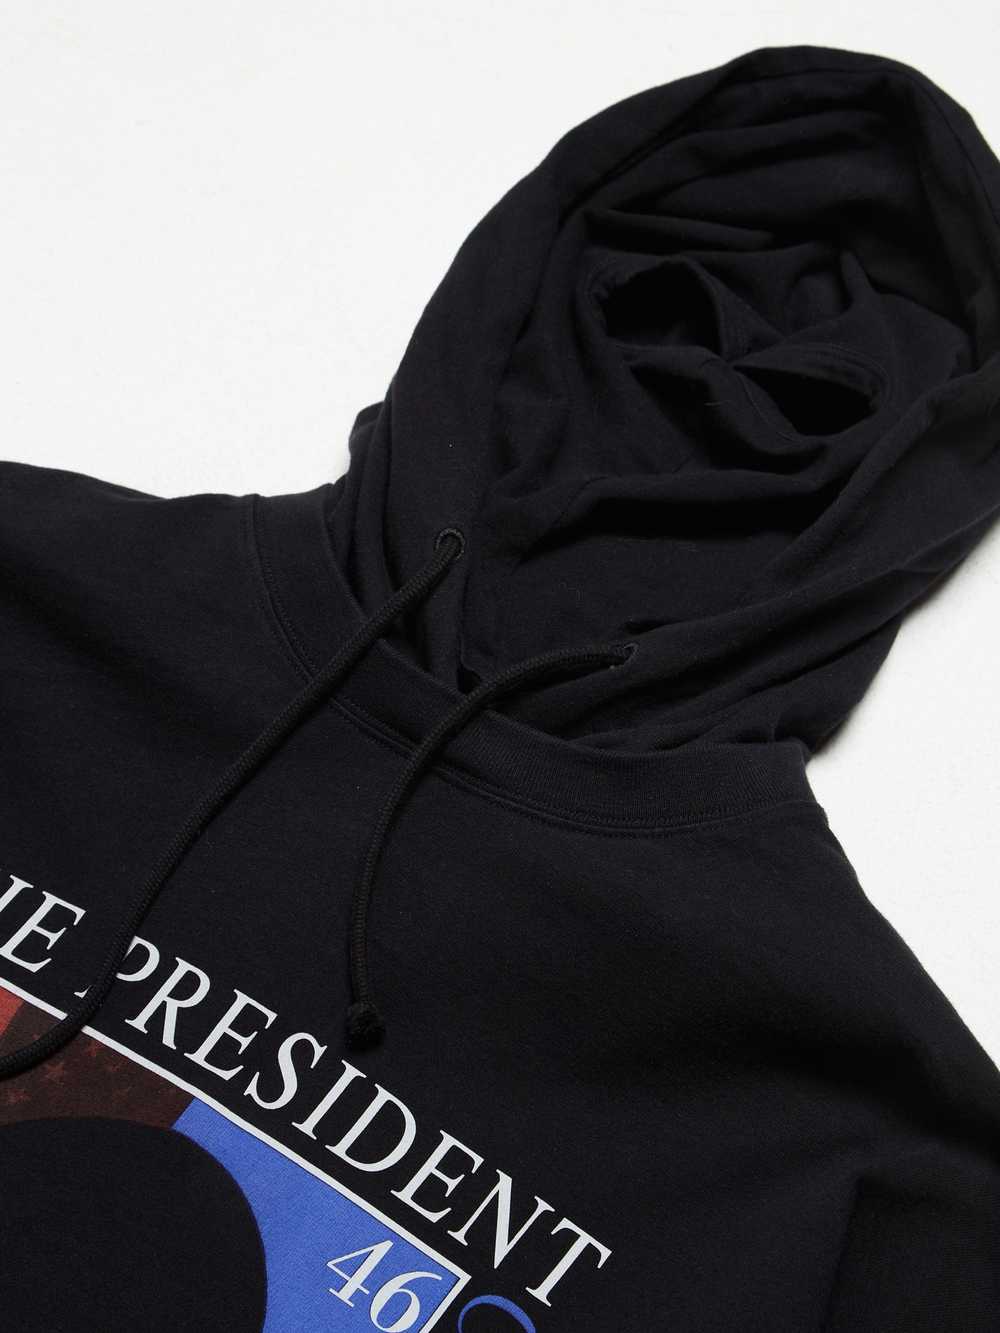 Vetements AW20 The President Black Jersey Hoodie - image 4